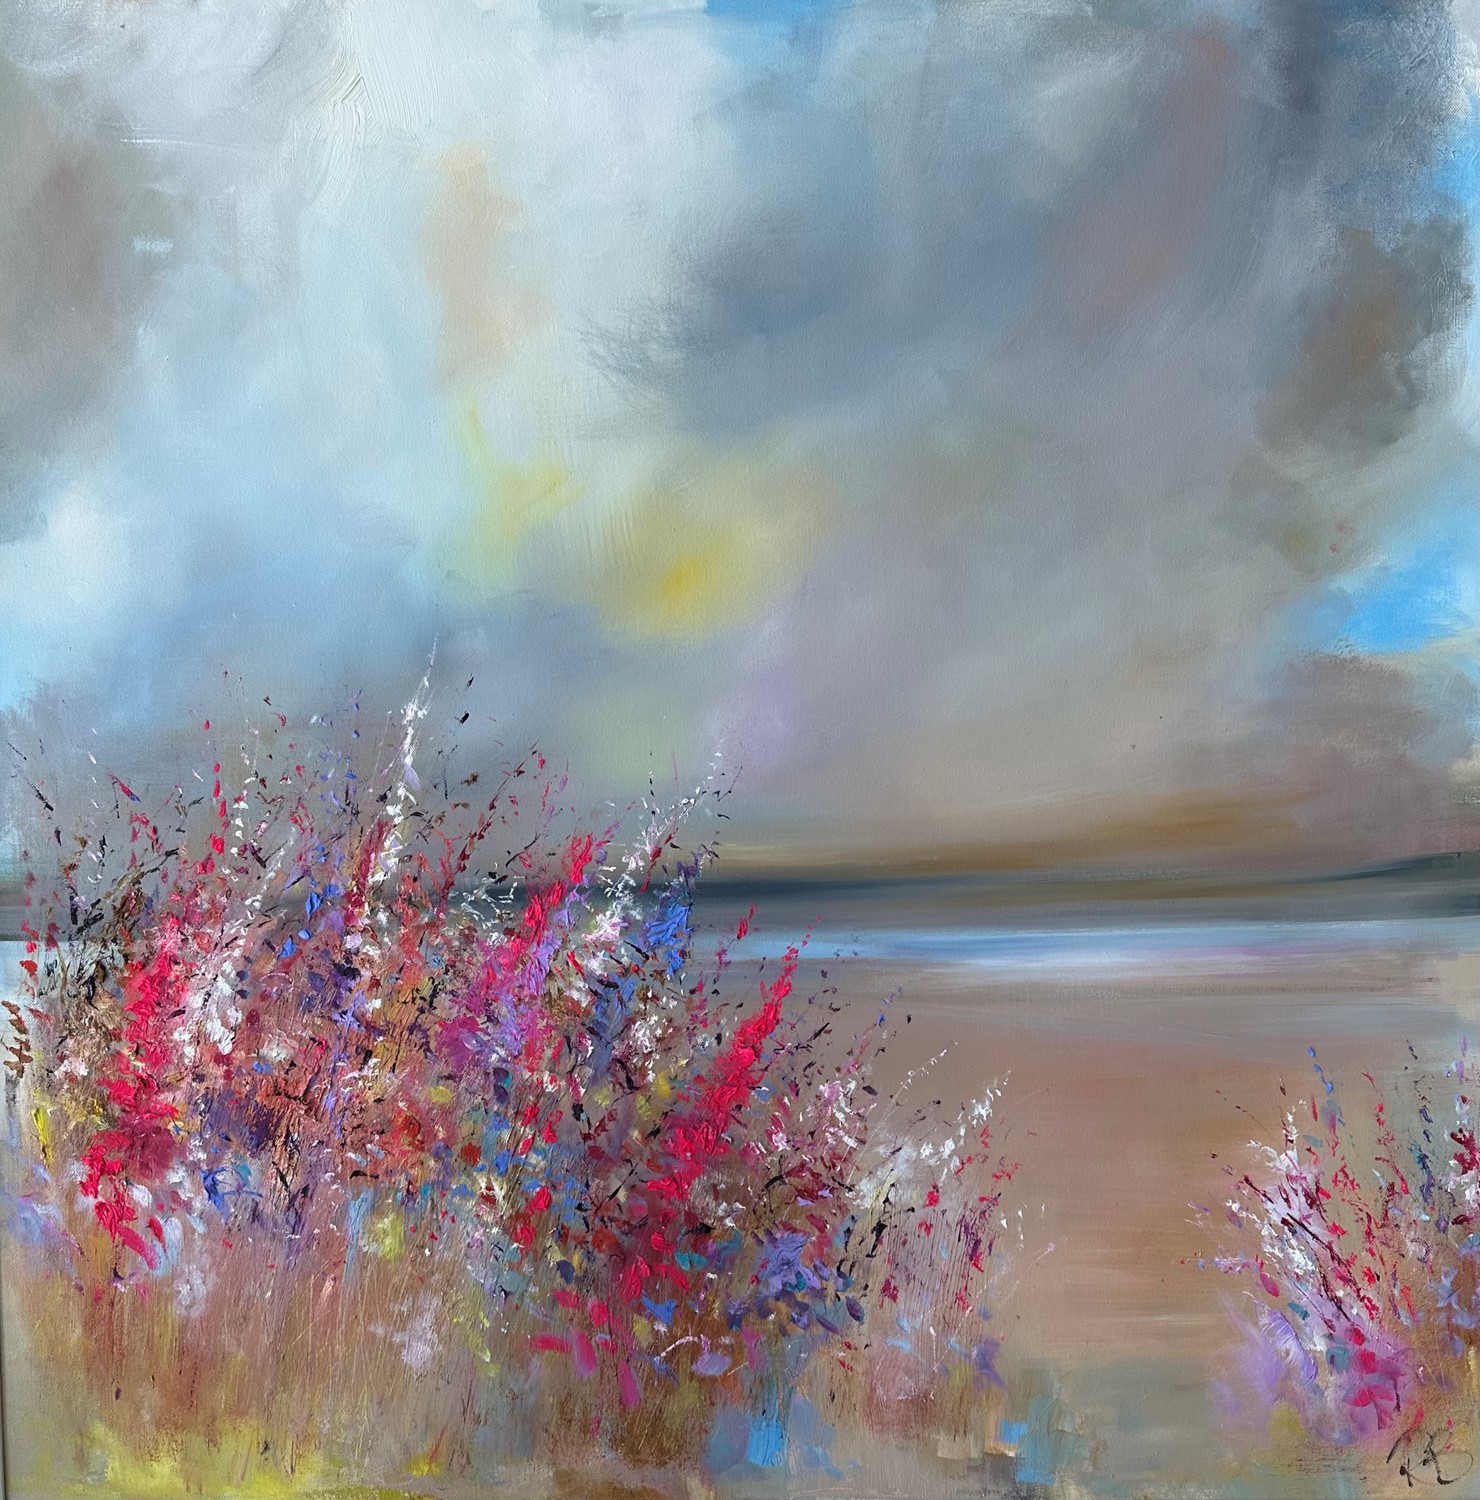 'Wild flowers against a Brooding Sky ' by artist Rosanne Barr